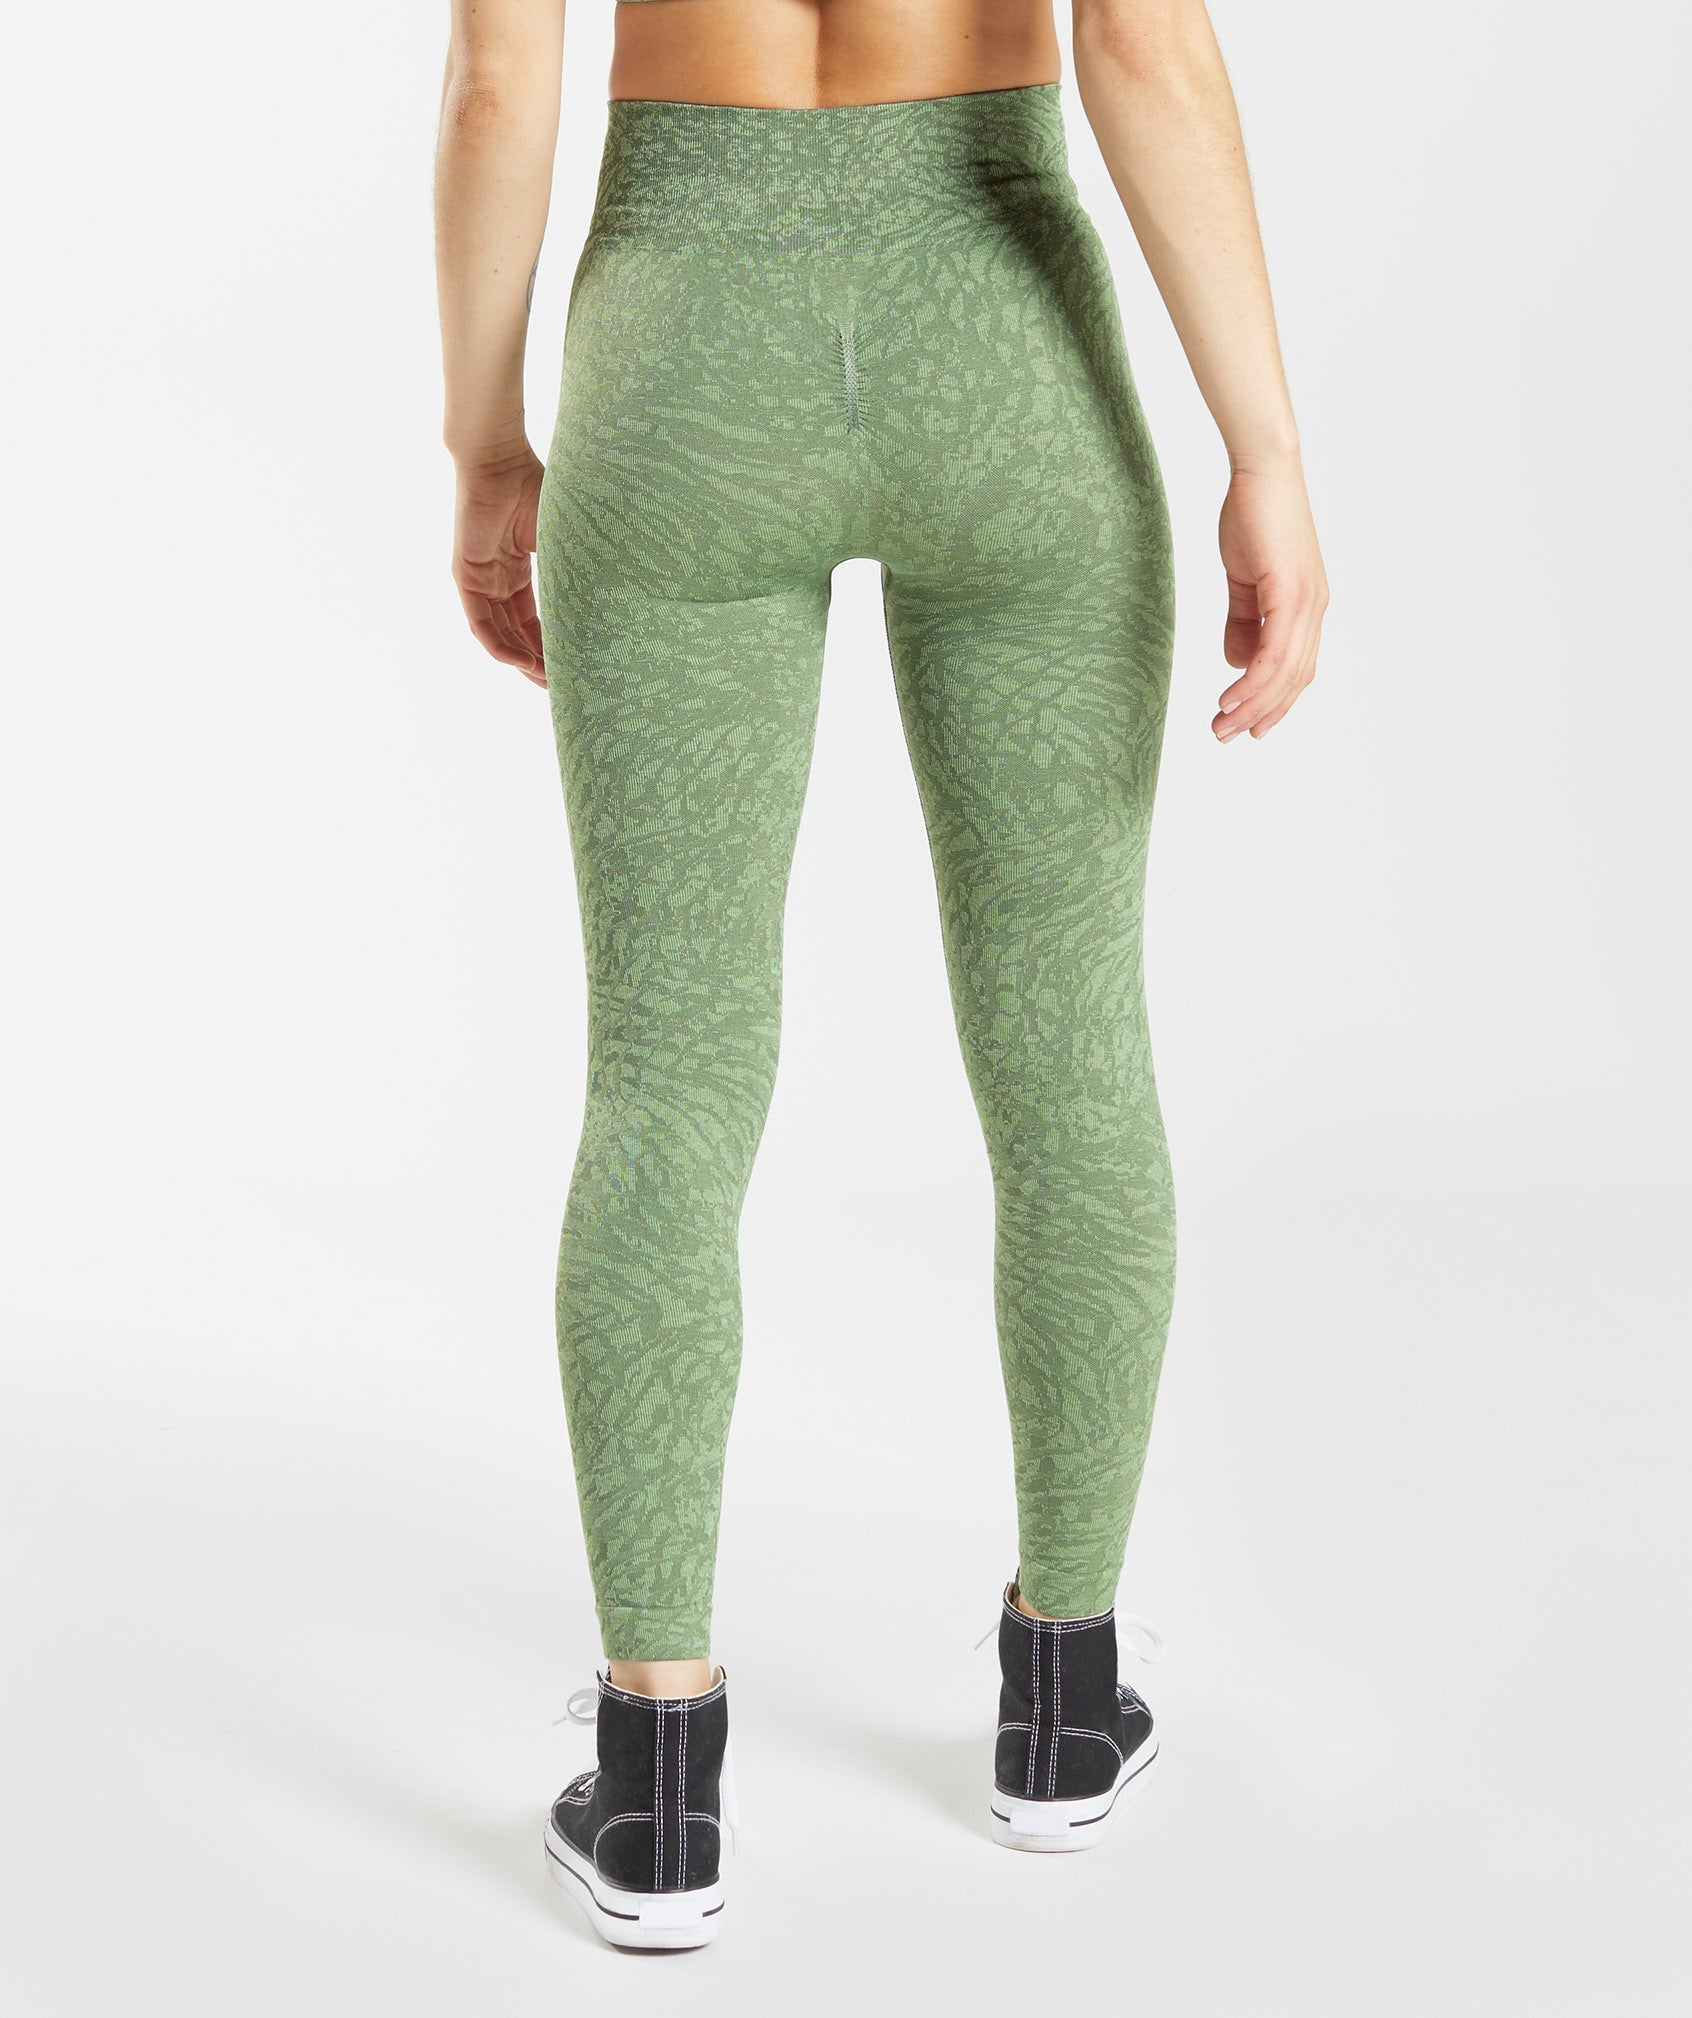 Look At Me Now Seamless Leggings - Leapord - L.A. Green